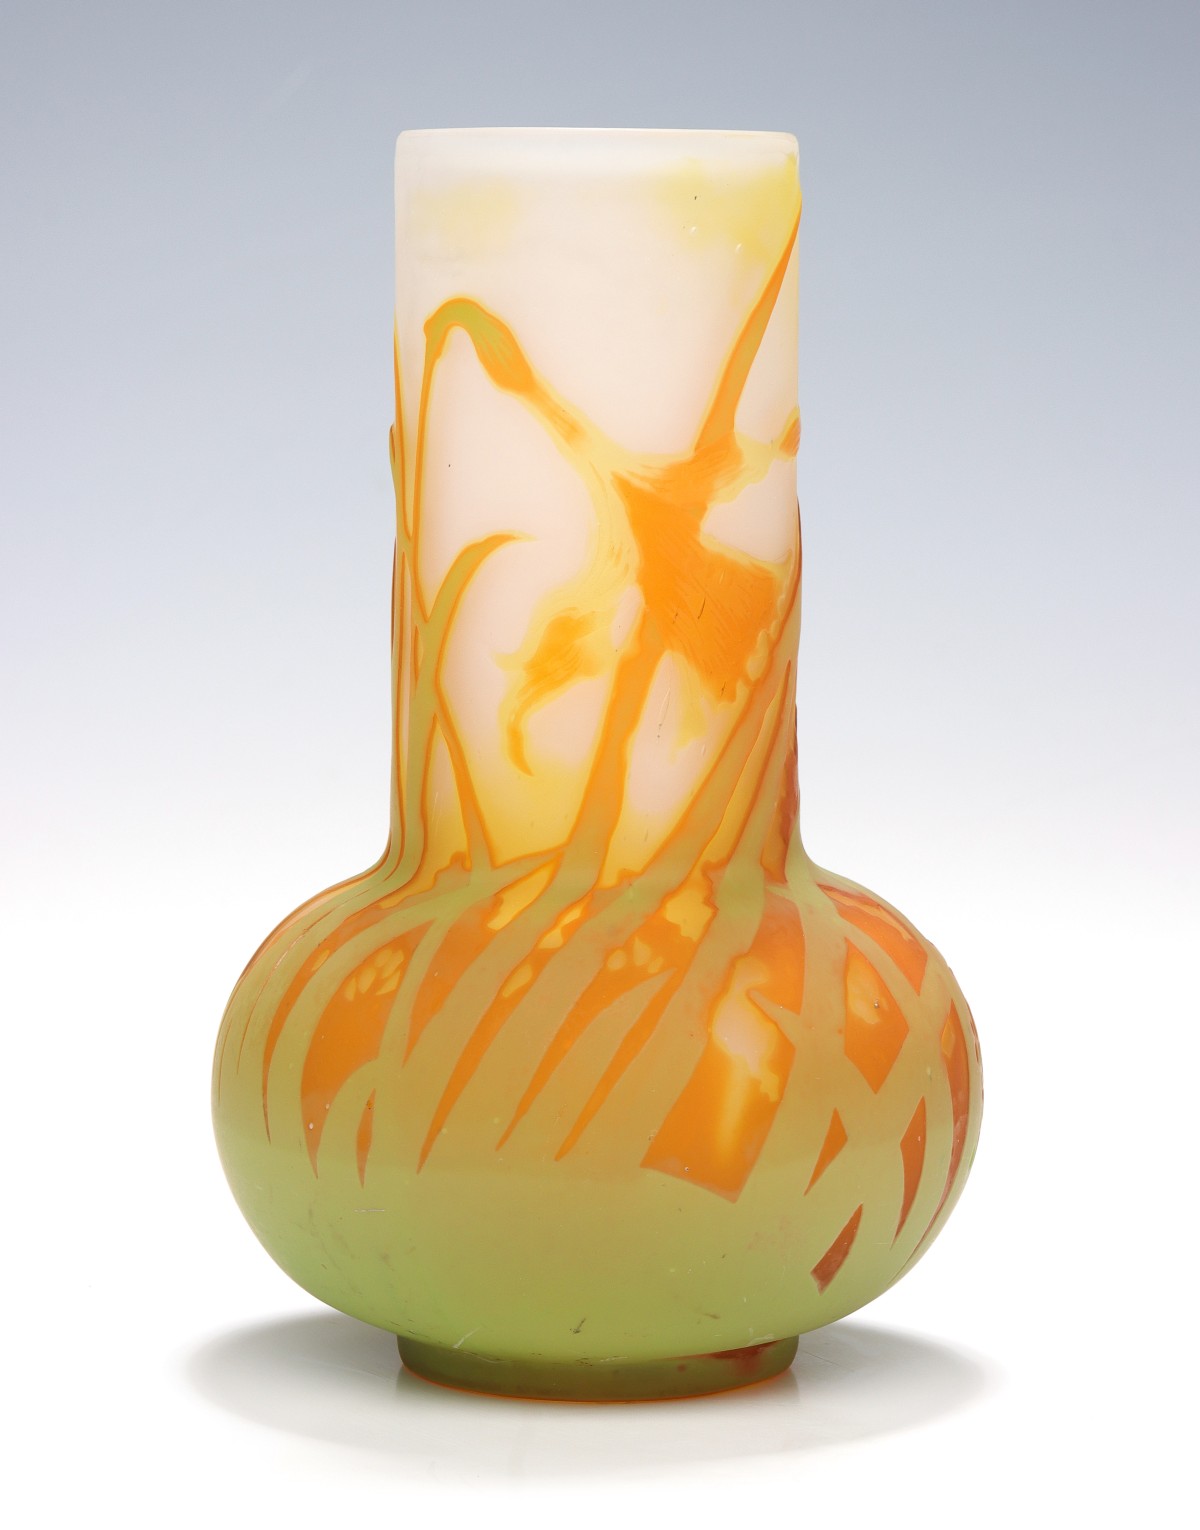 AN ART NOUVEAU FRENCH CAMEO GLASS VASE SIGNED GALLÃ‰